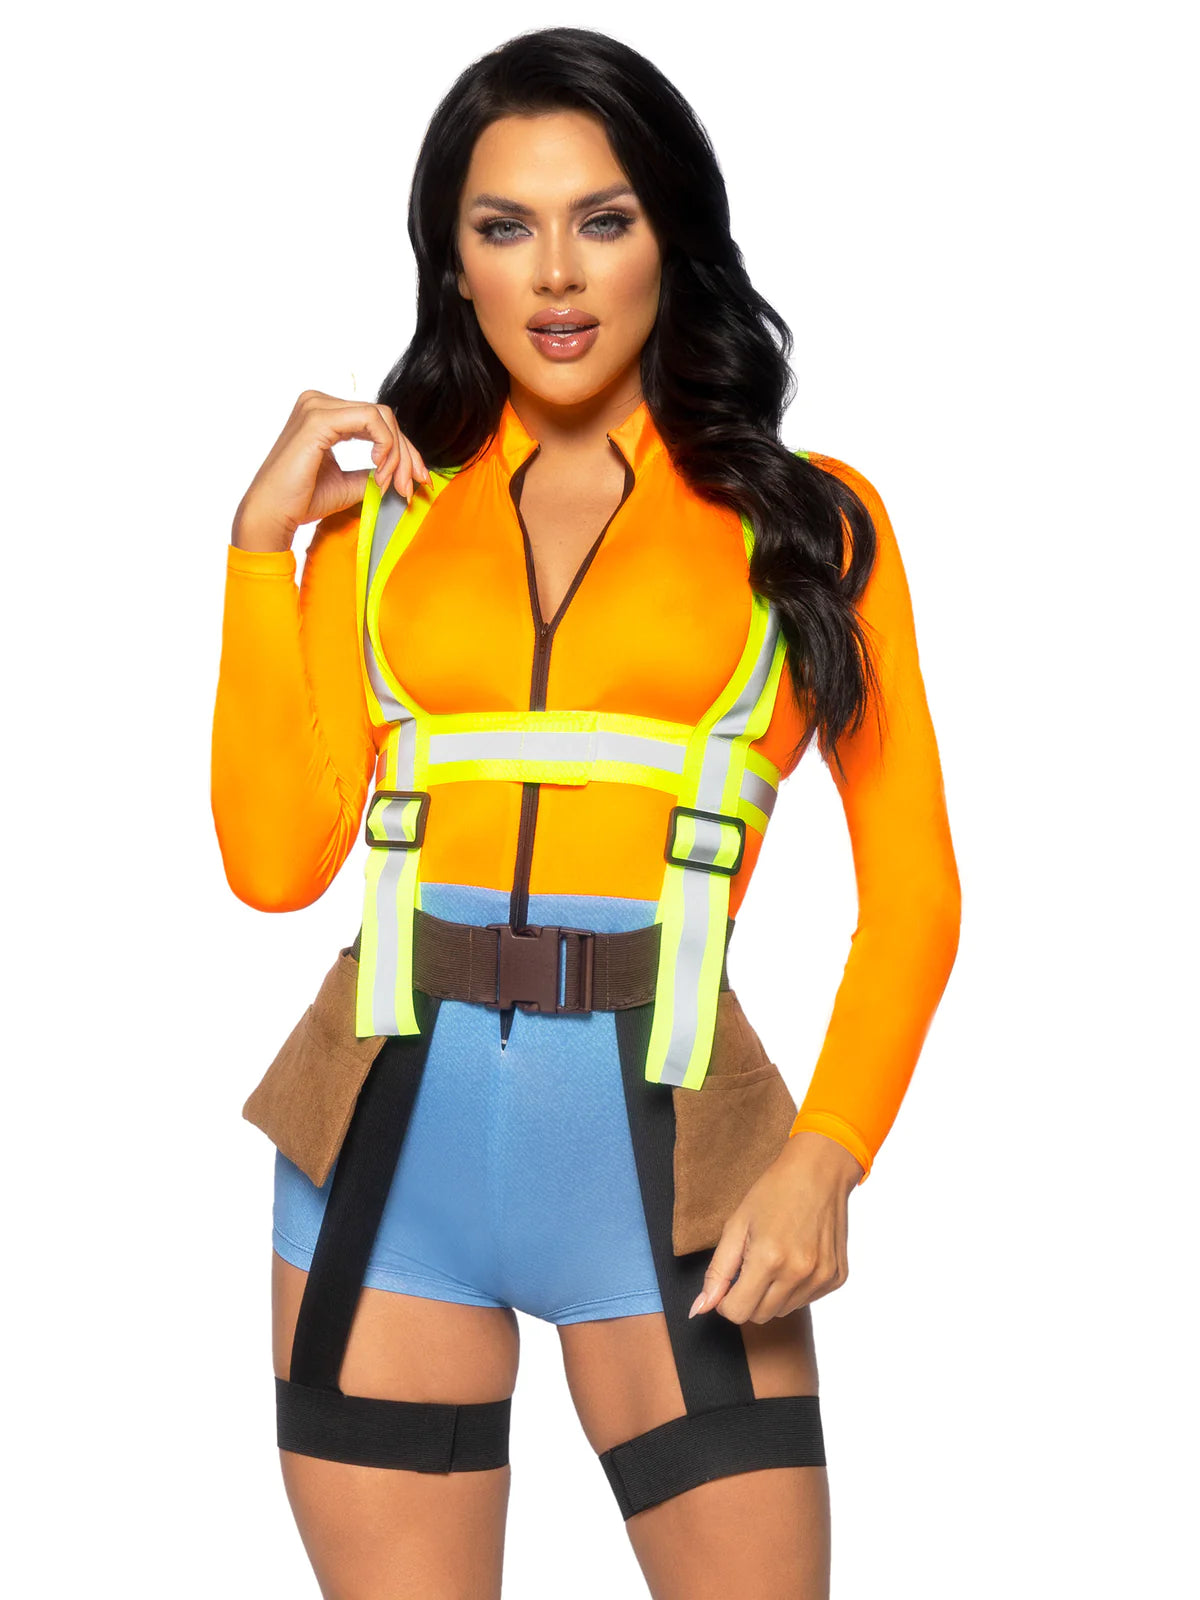 Nailed It Sexy Construction Worker Women's Costume